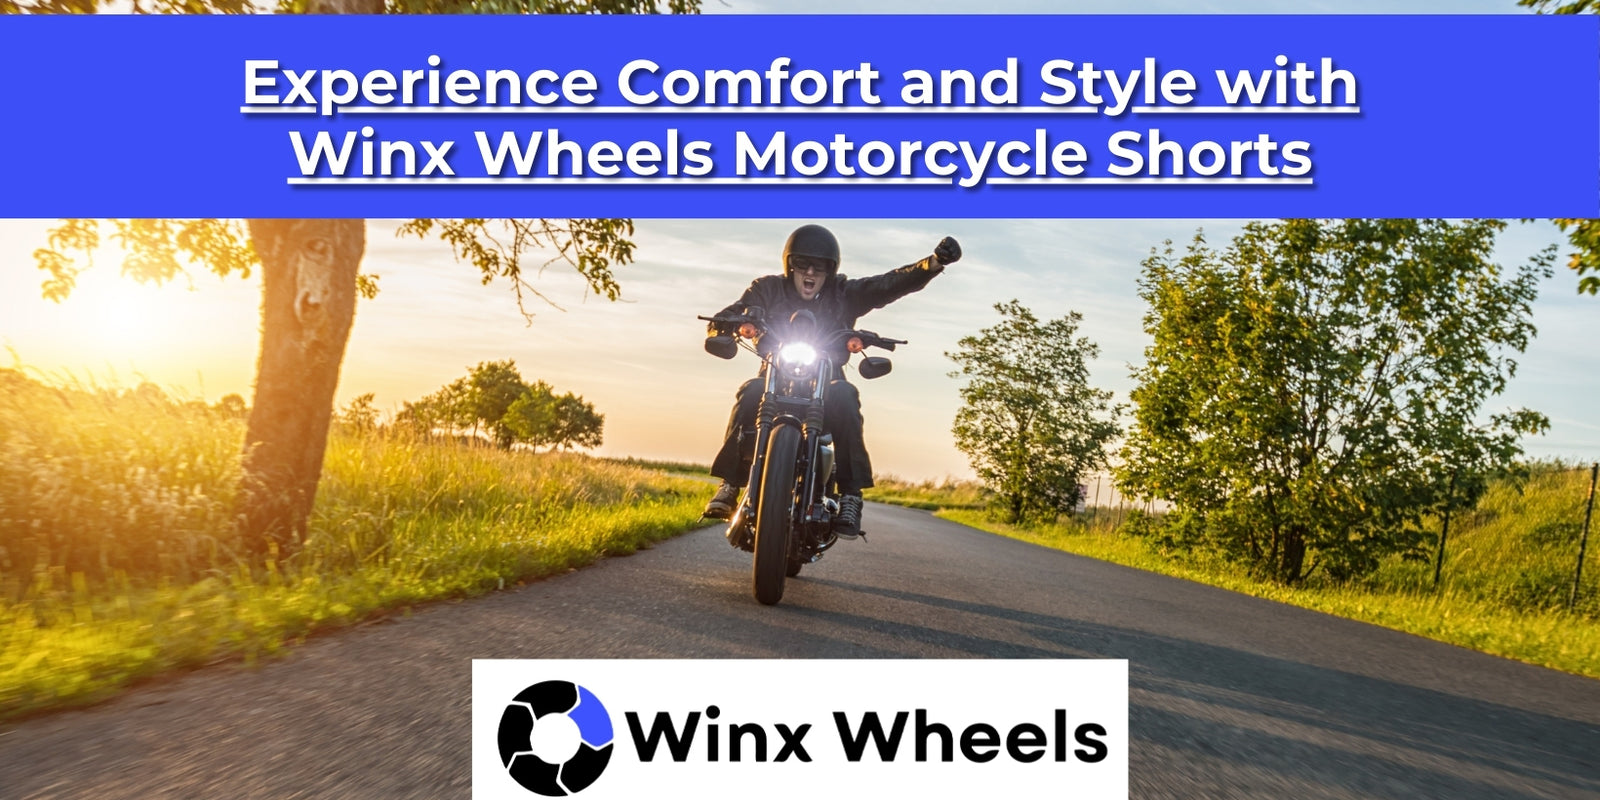 Experience Comfort and Style with Winx Wheels Motorcycle Shorts